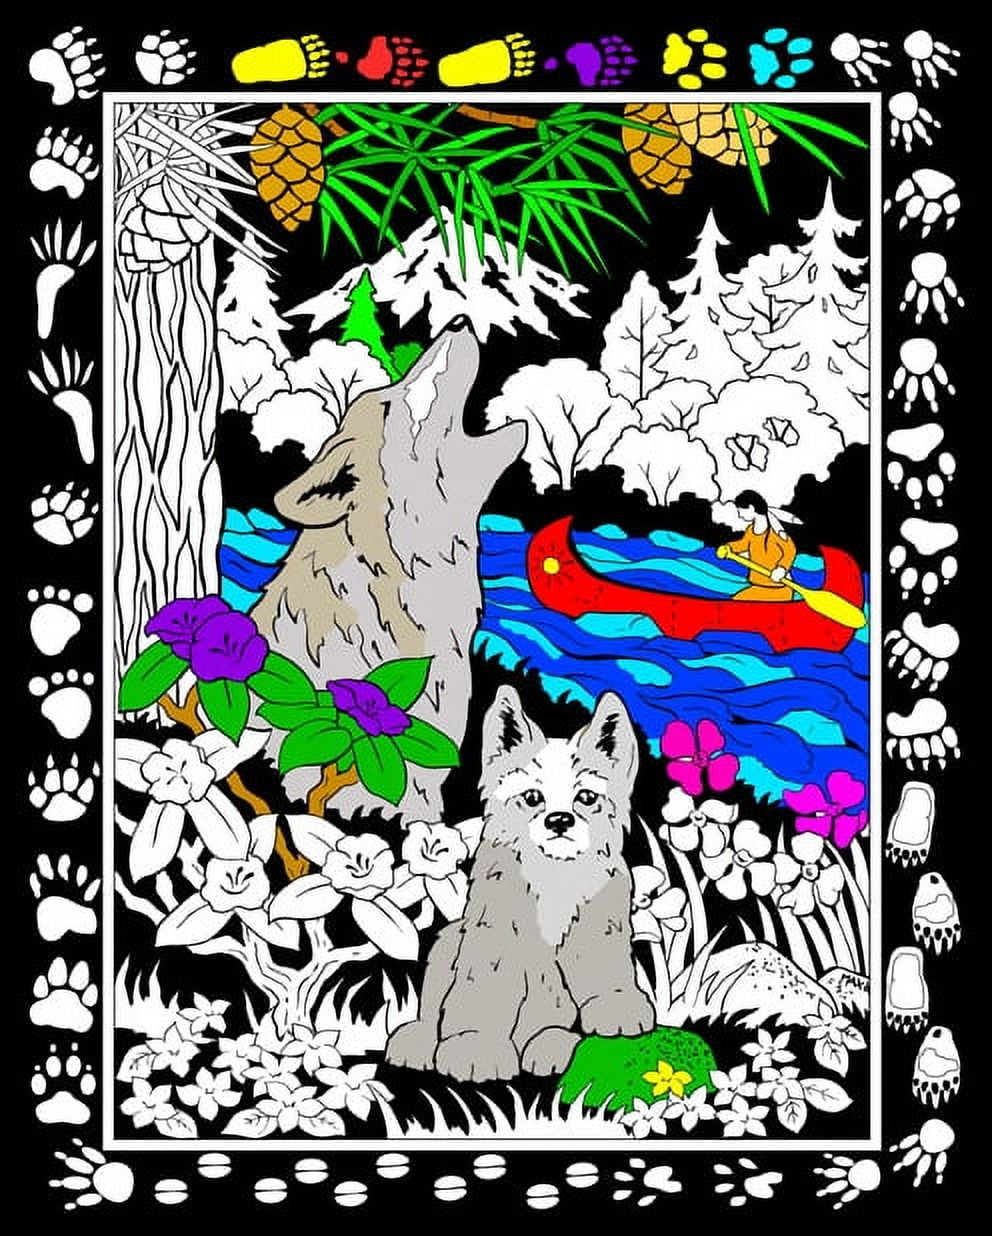 Floral Mania - Fuzzy Velvet Coloring Poster 16x20 Inches